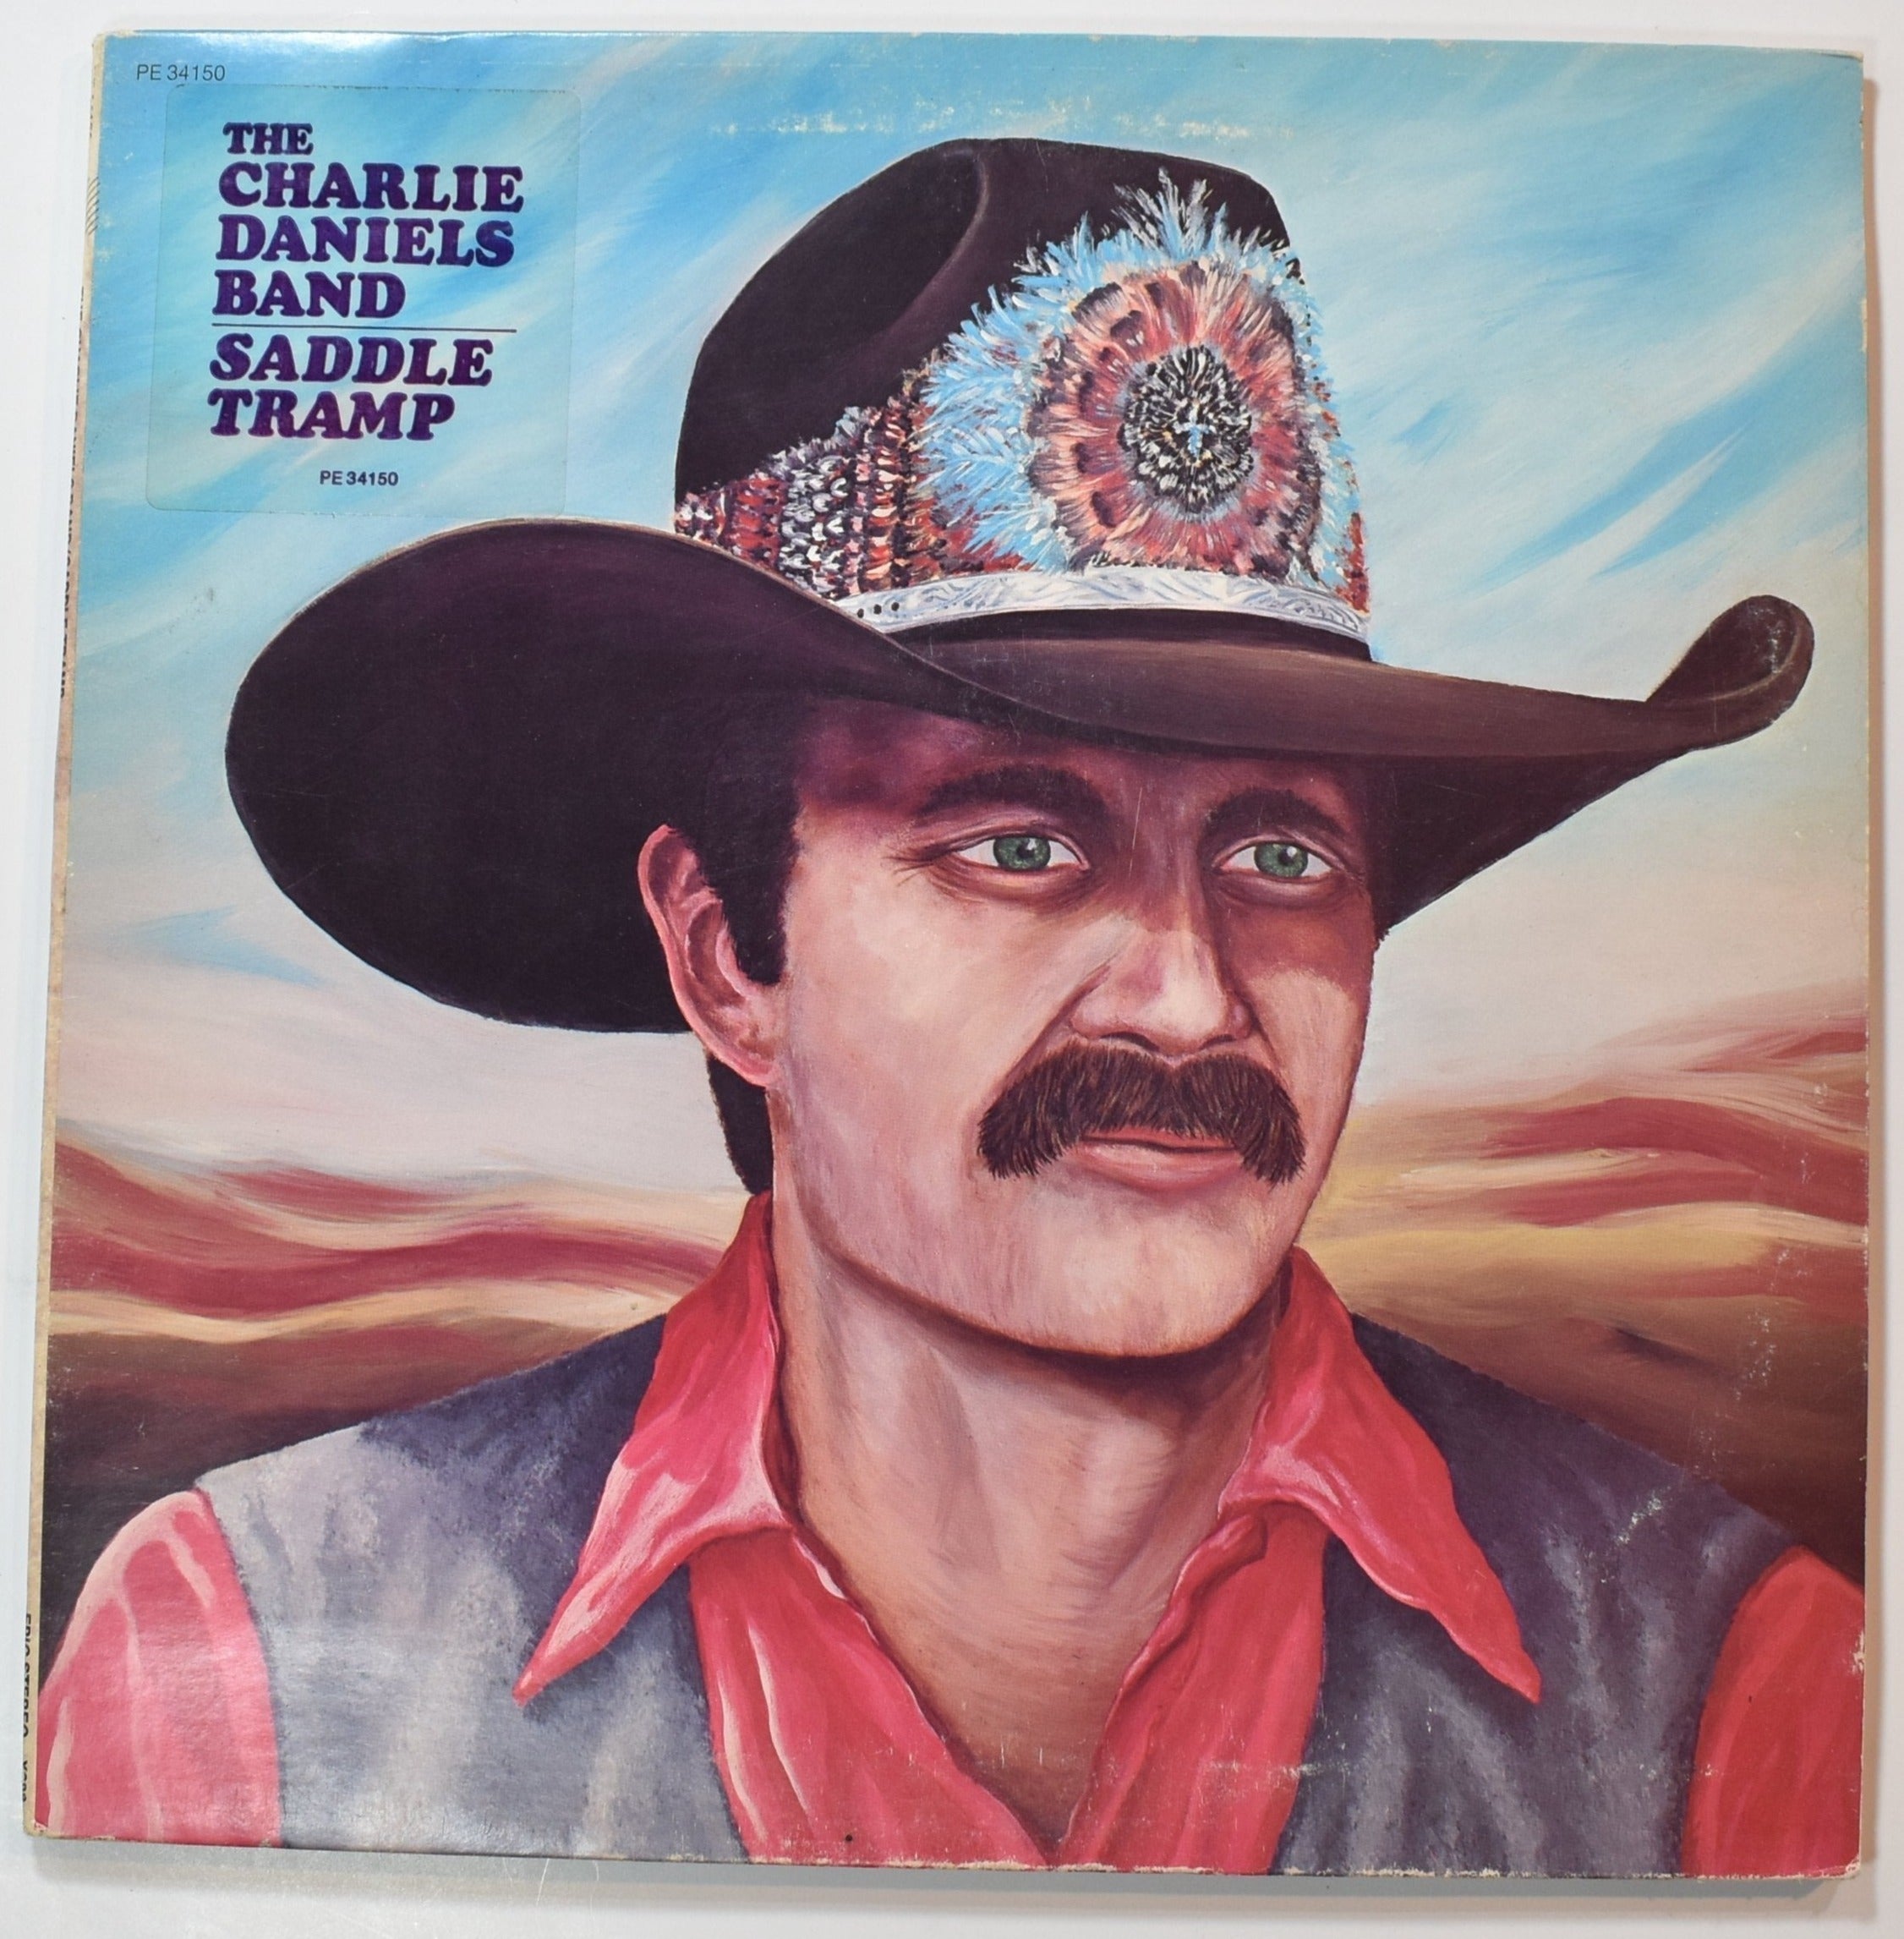 Vinyl Music Record the Charlie Daniels Band Saddle Tramp used record